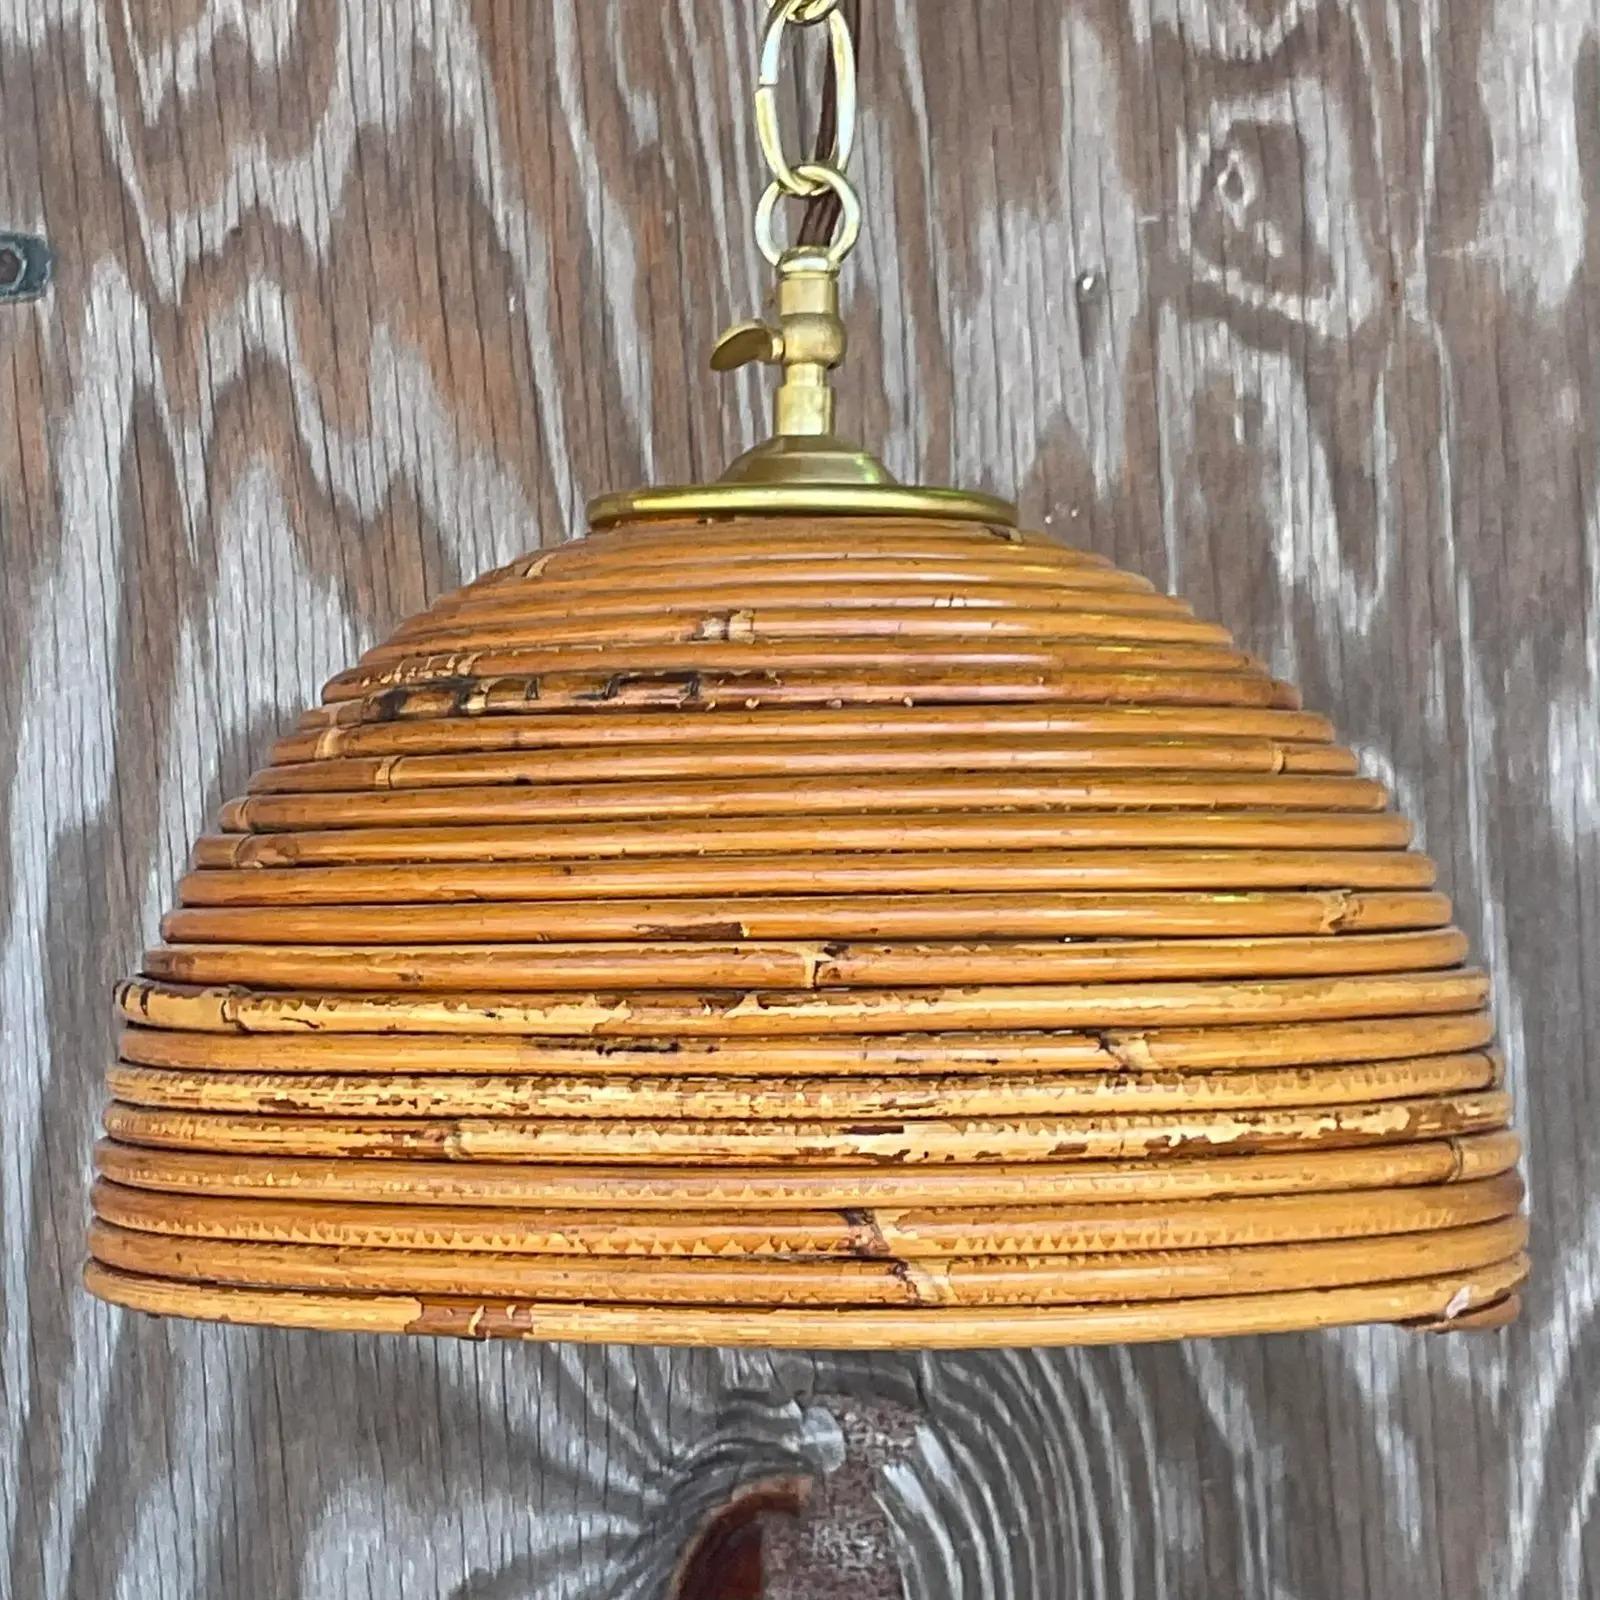 Fabulous vintage Coastal chandelier. A beautiful pencil reed dome with brushed brass hardware. Fully restored with all new hardware and brown silk wrapped cord. Acquired from a Palm Beach estate.

The light is in great vintage condition. Minor